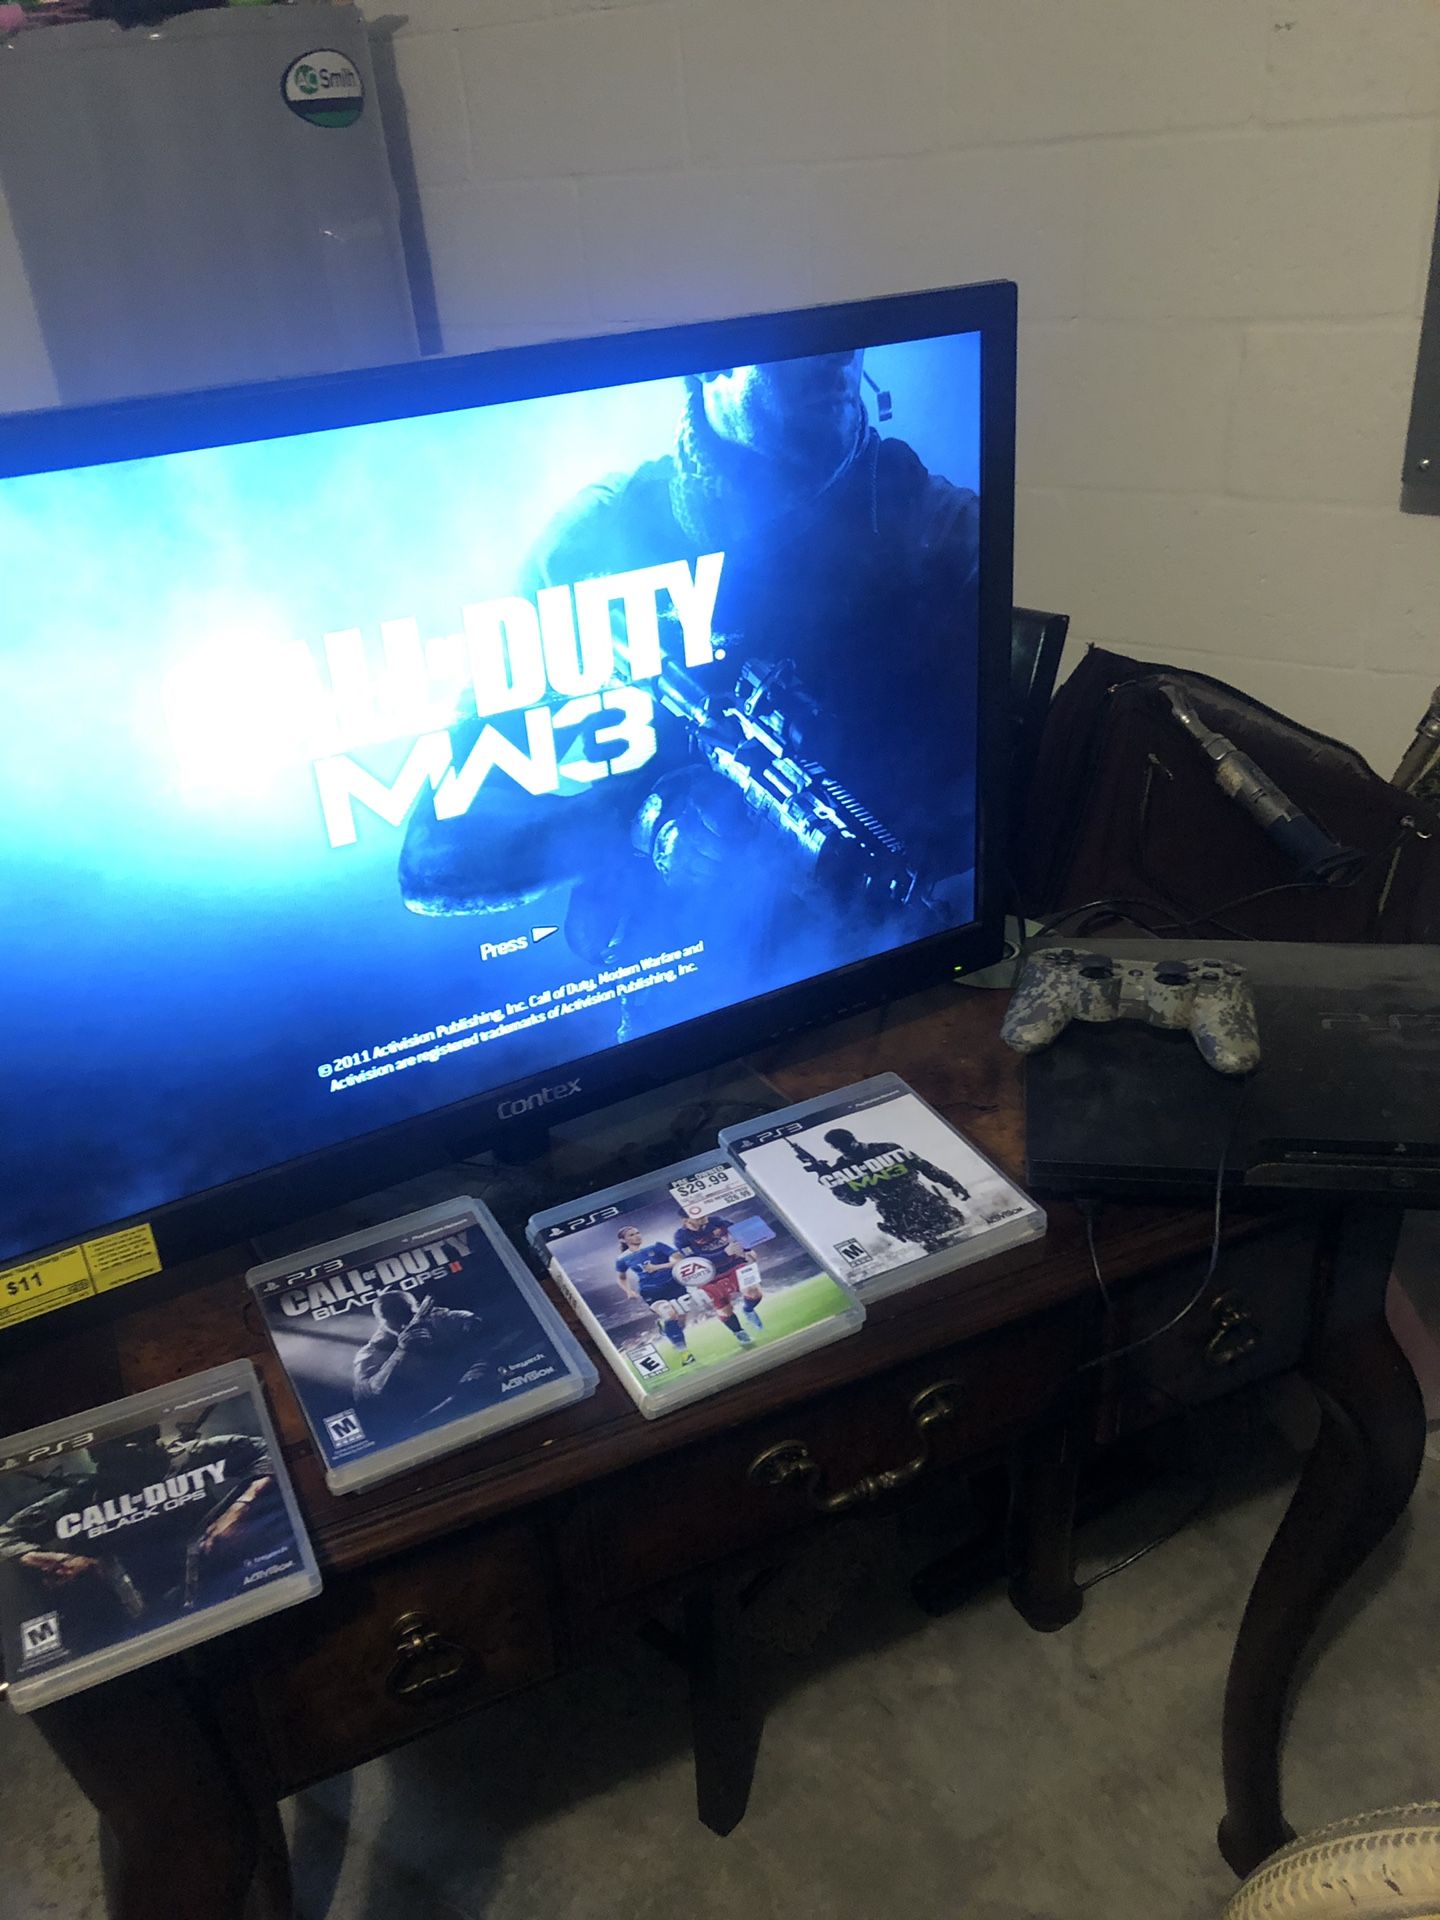 PS3 whit games one remote and a 32 inch tv selling as a bundle